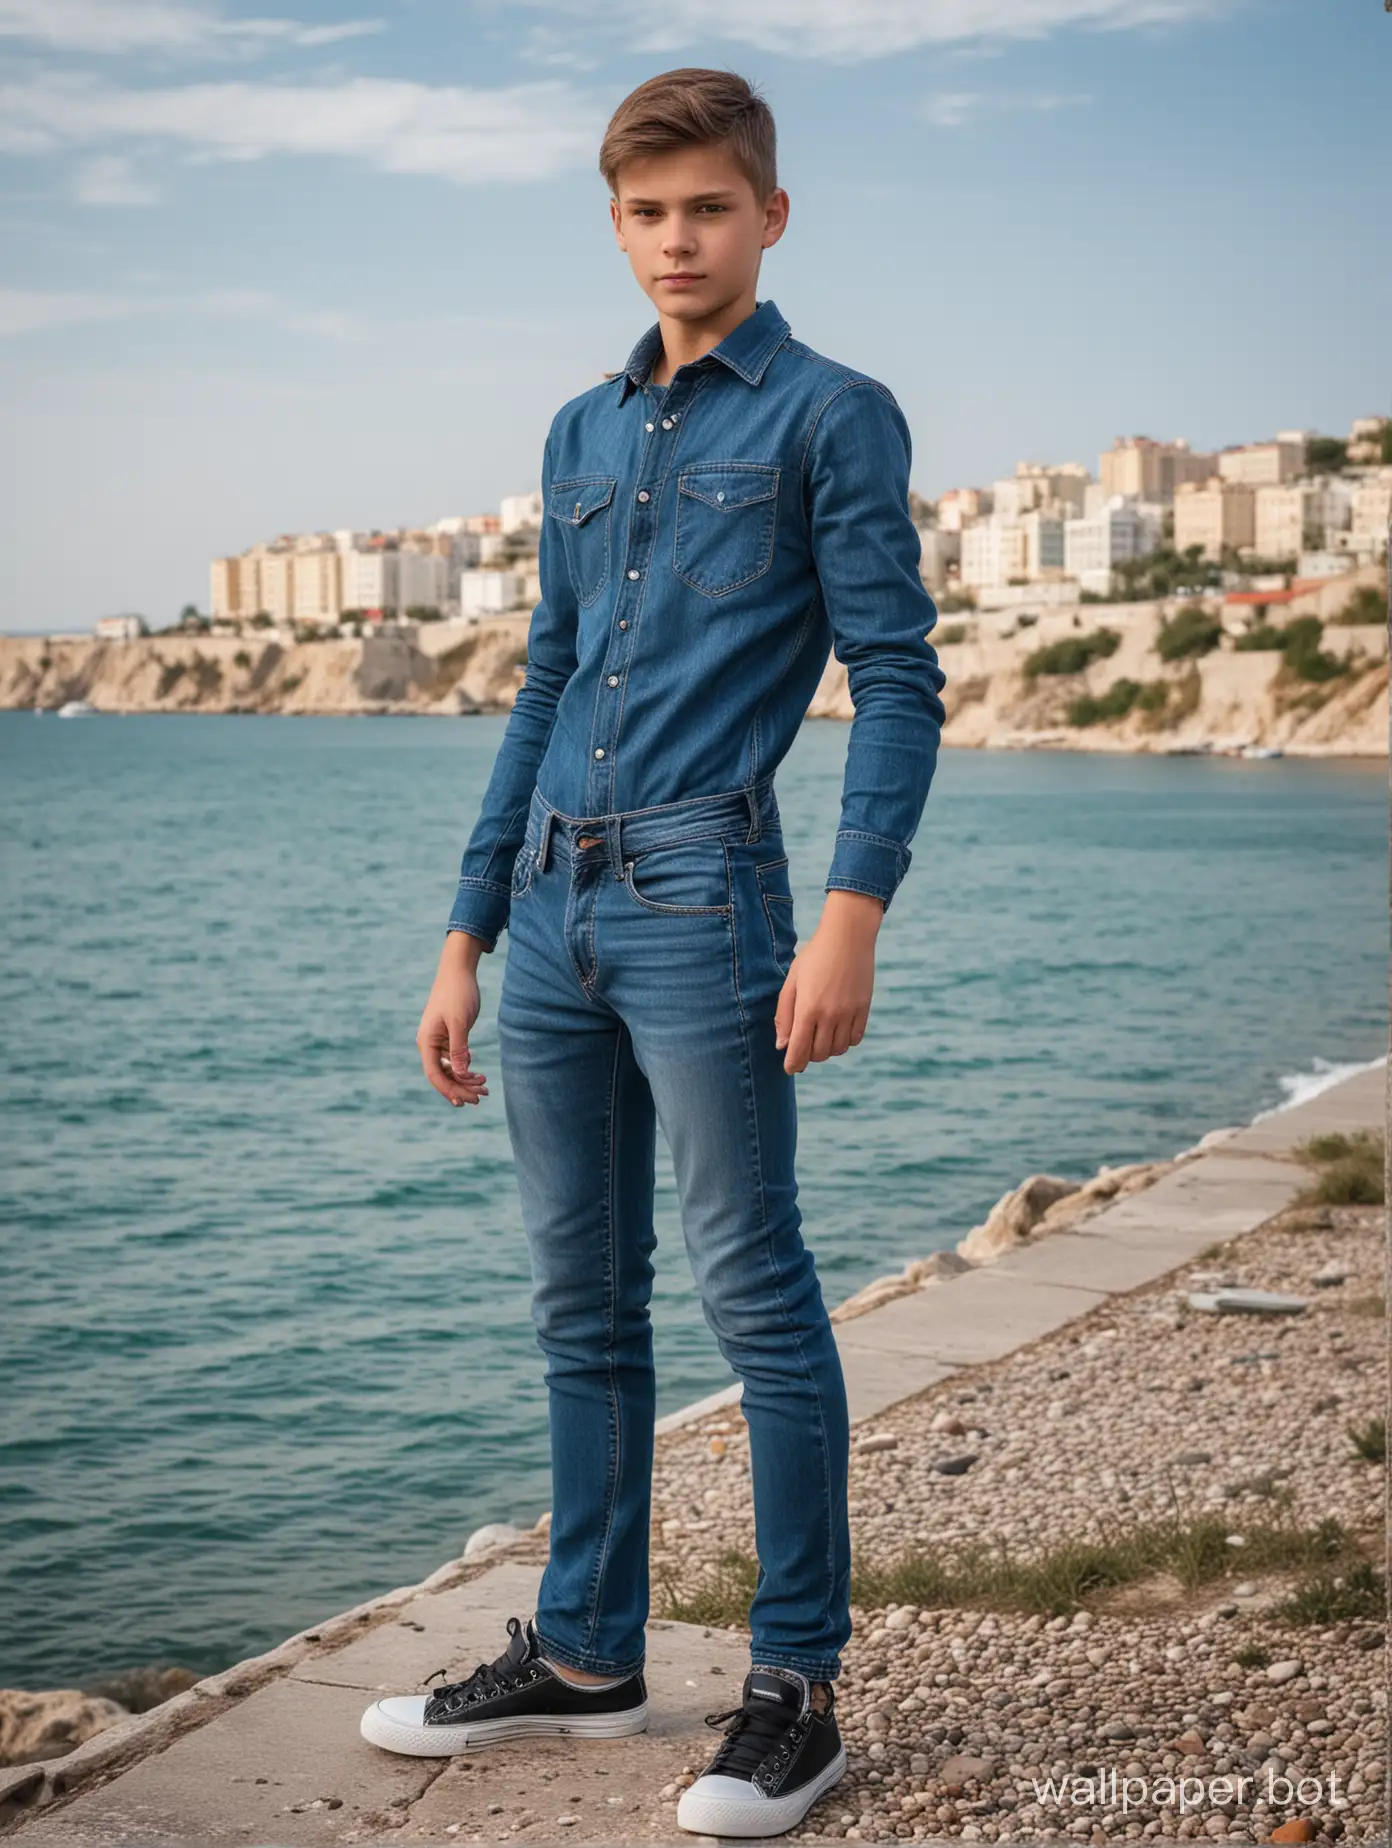 Russian schoolboy 13 years old in Crimea against the background of the sea, full height, dynamic poses, people and buildings in the background, tight jeans, ass, back view, tight jeans